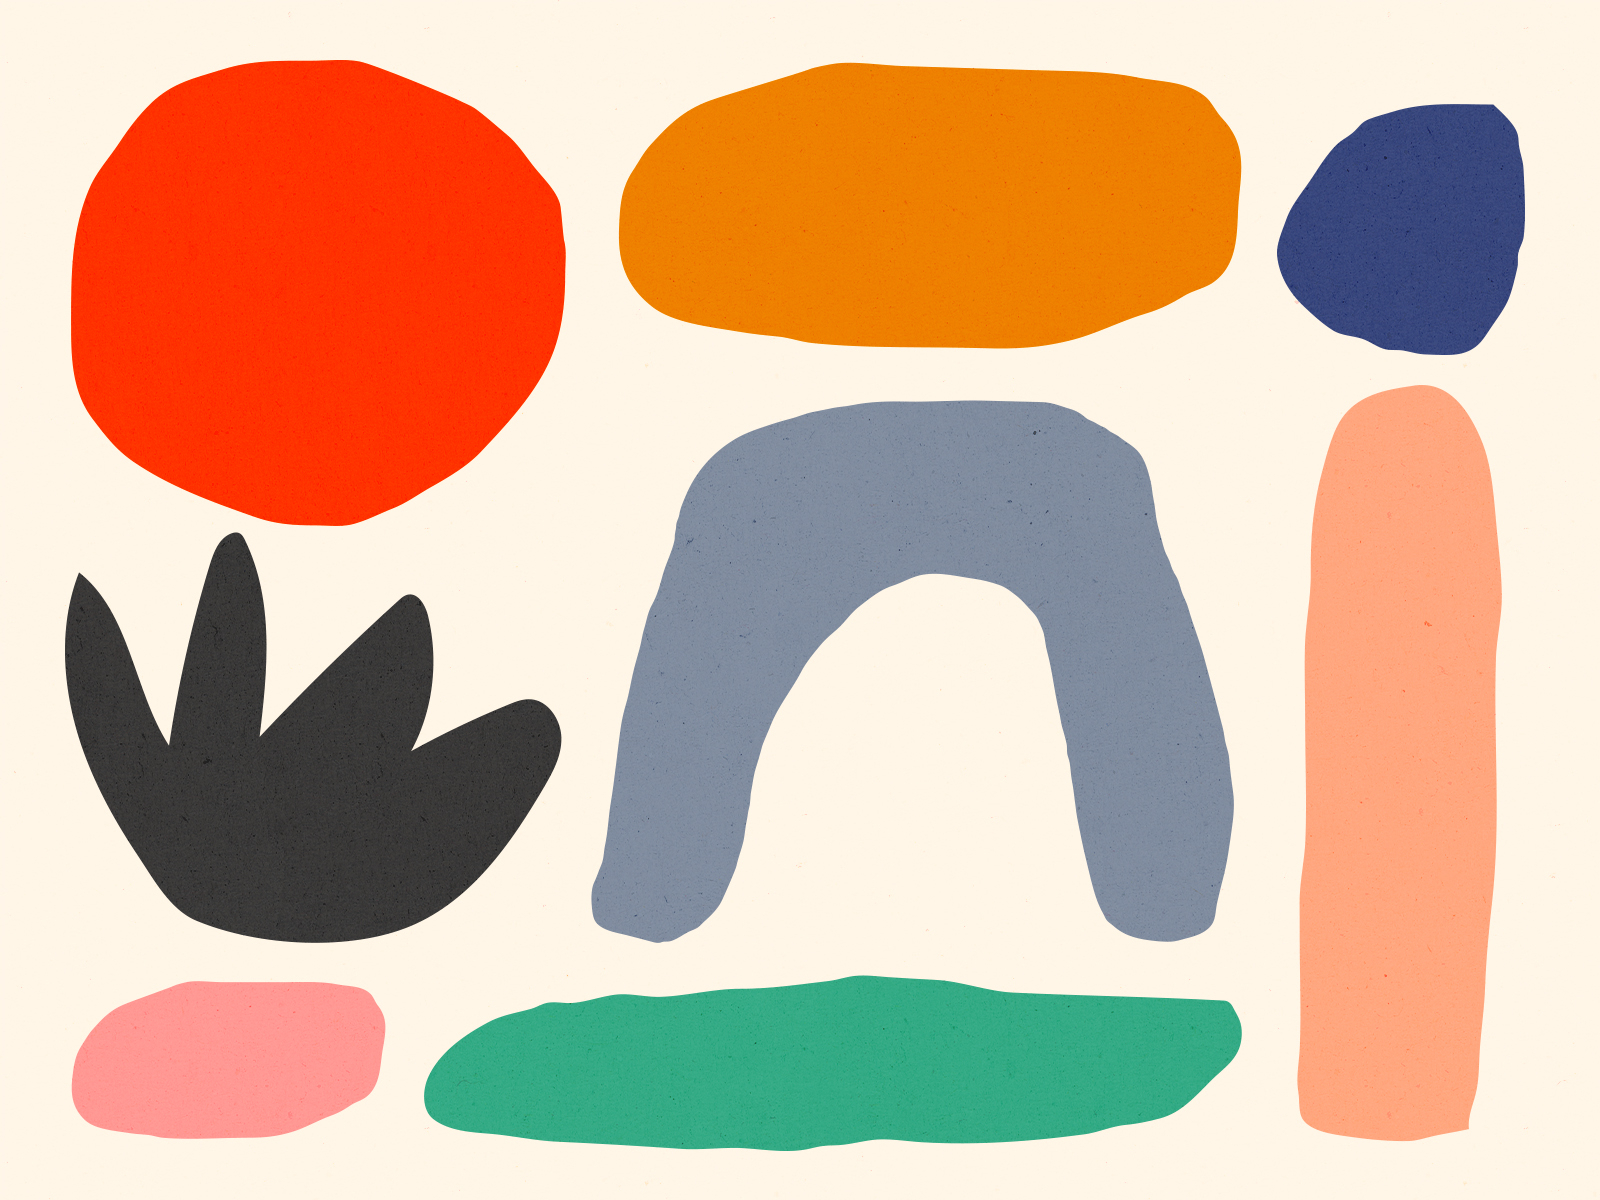 color-and-shapes-by-cory-uehara-on-dribbble